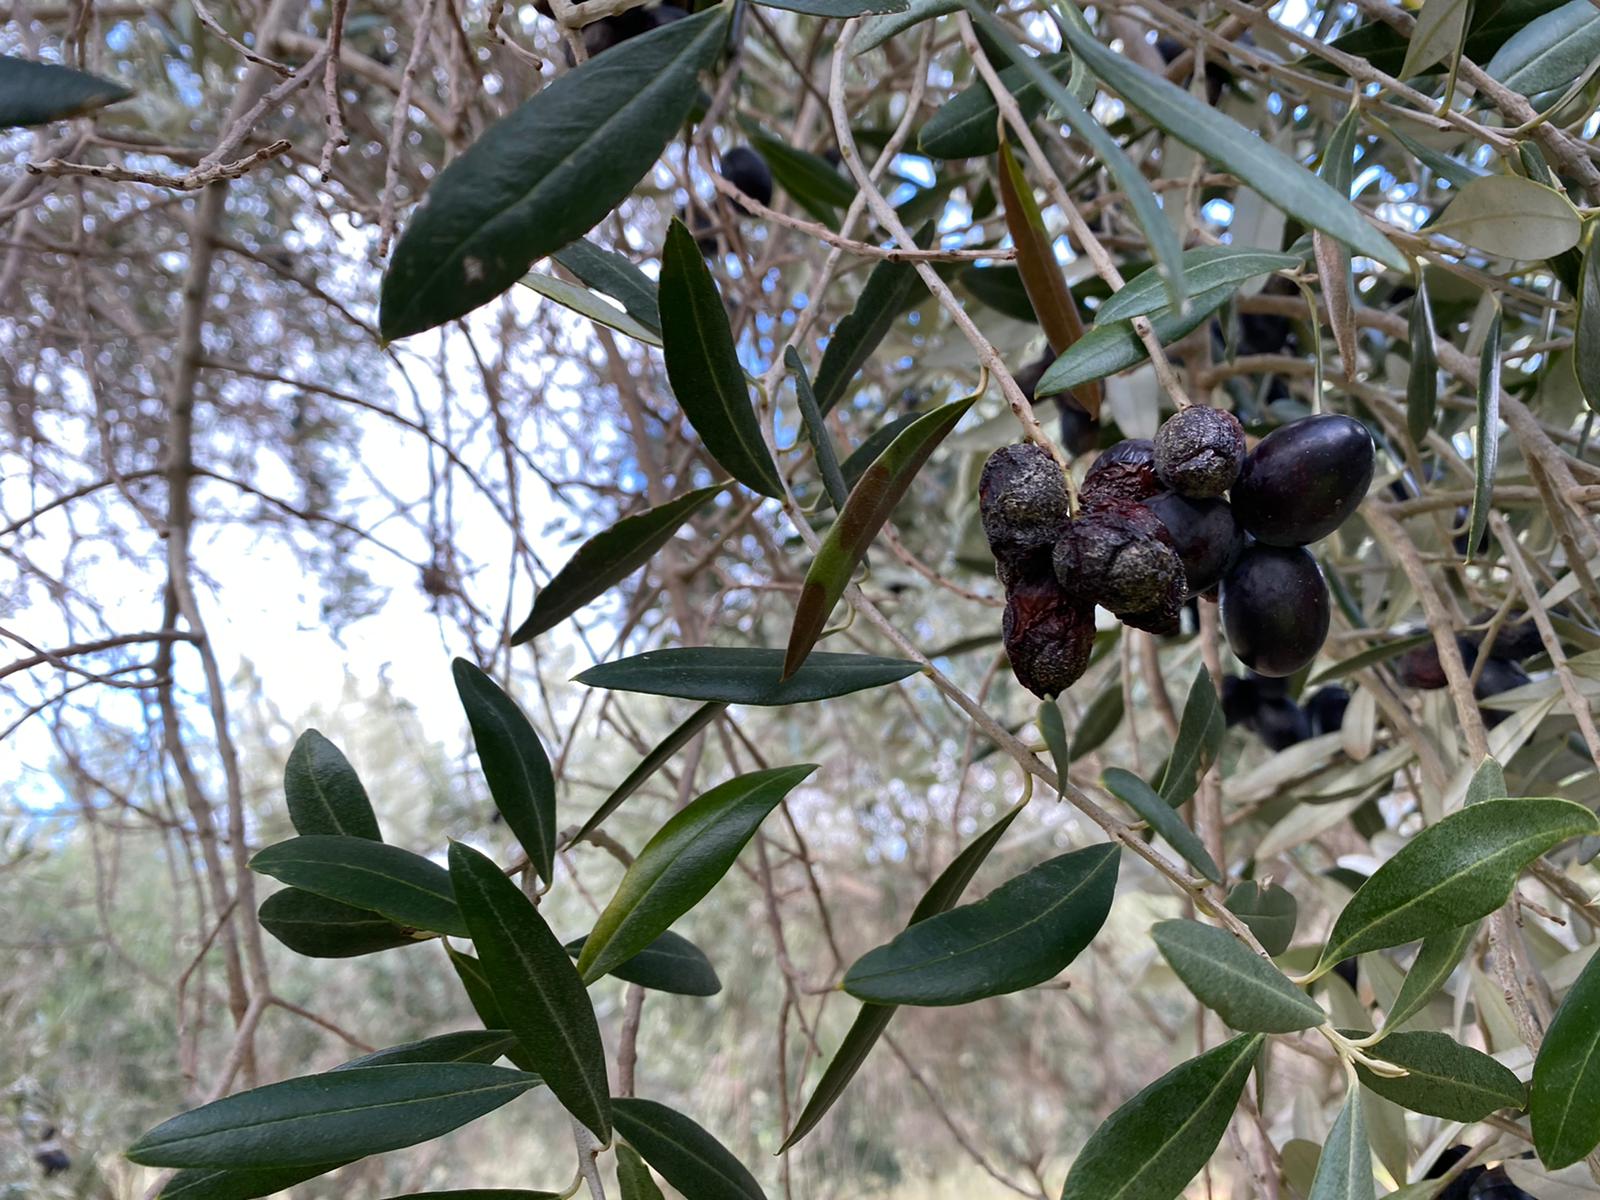 Ripe olives on the tree, infected by anthracnose, the main source of dispersal of the inoculum